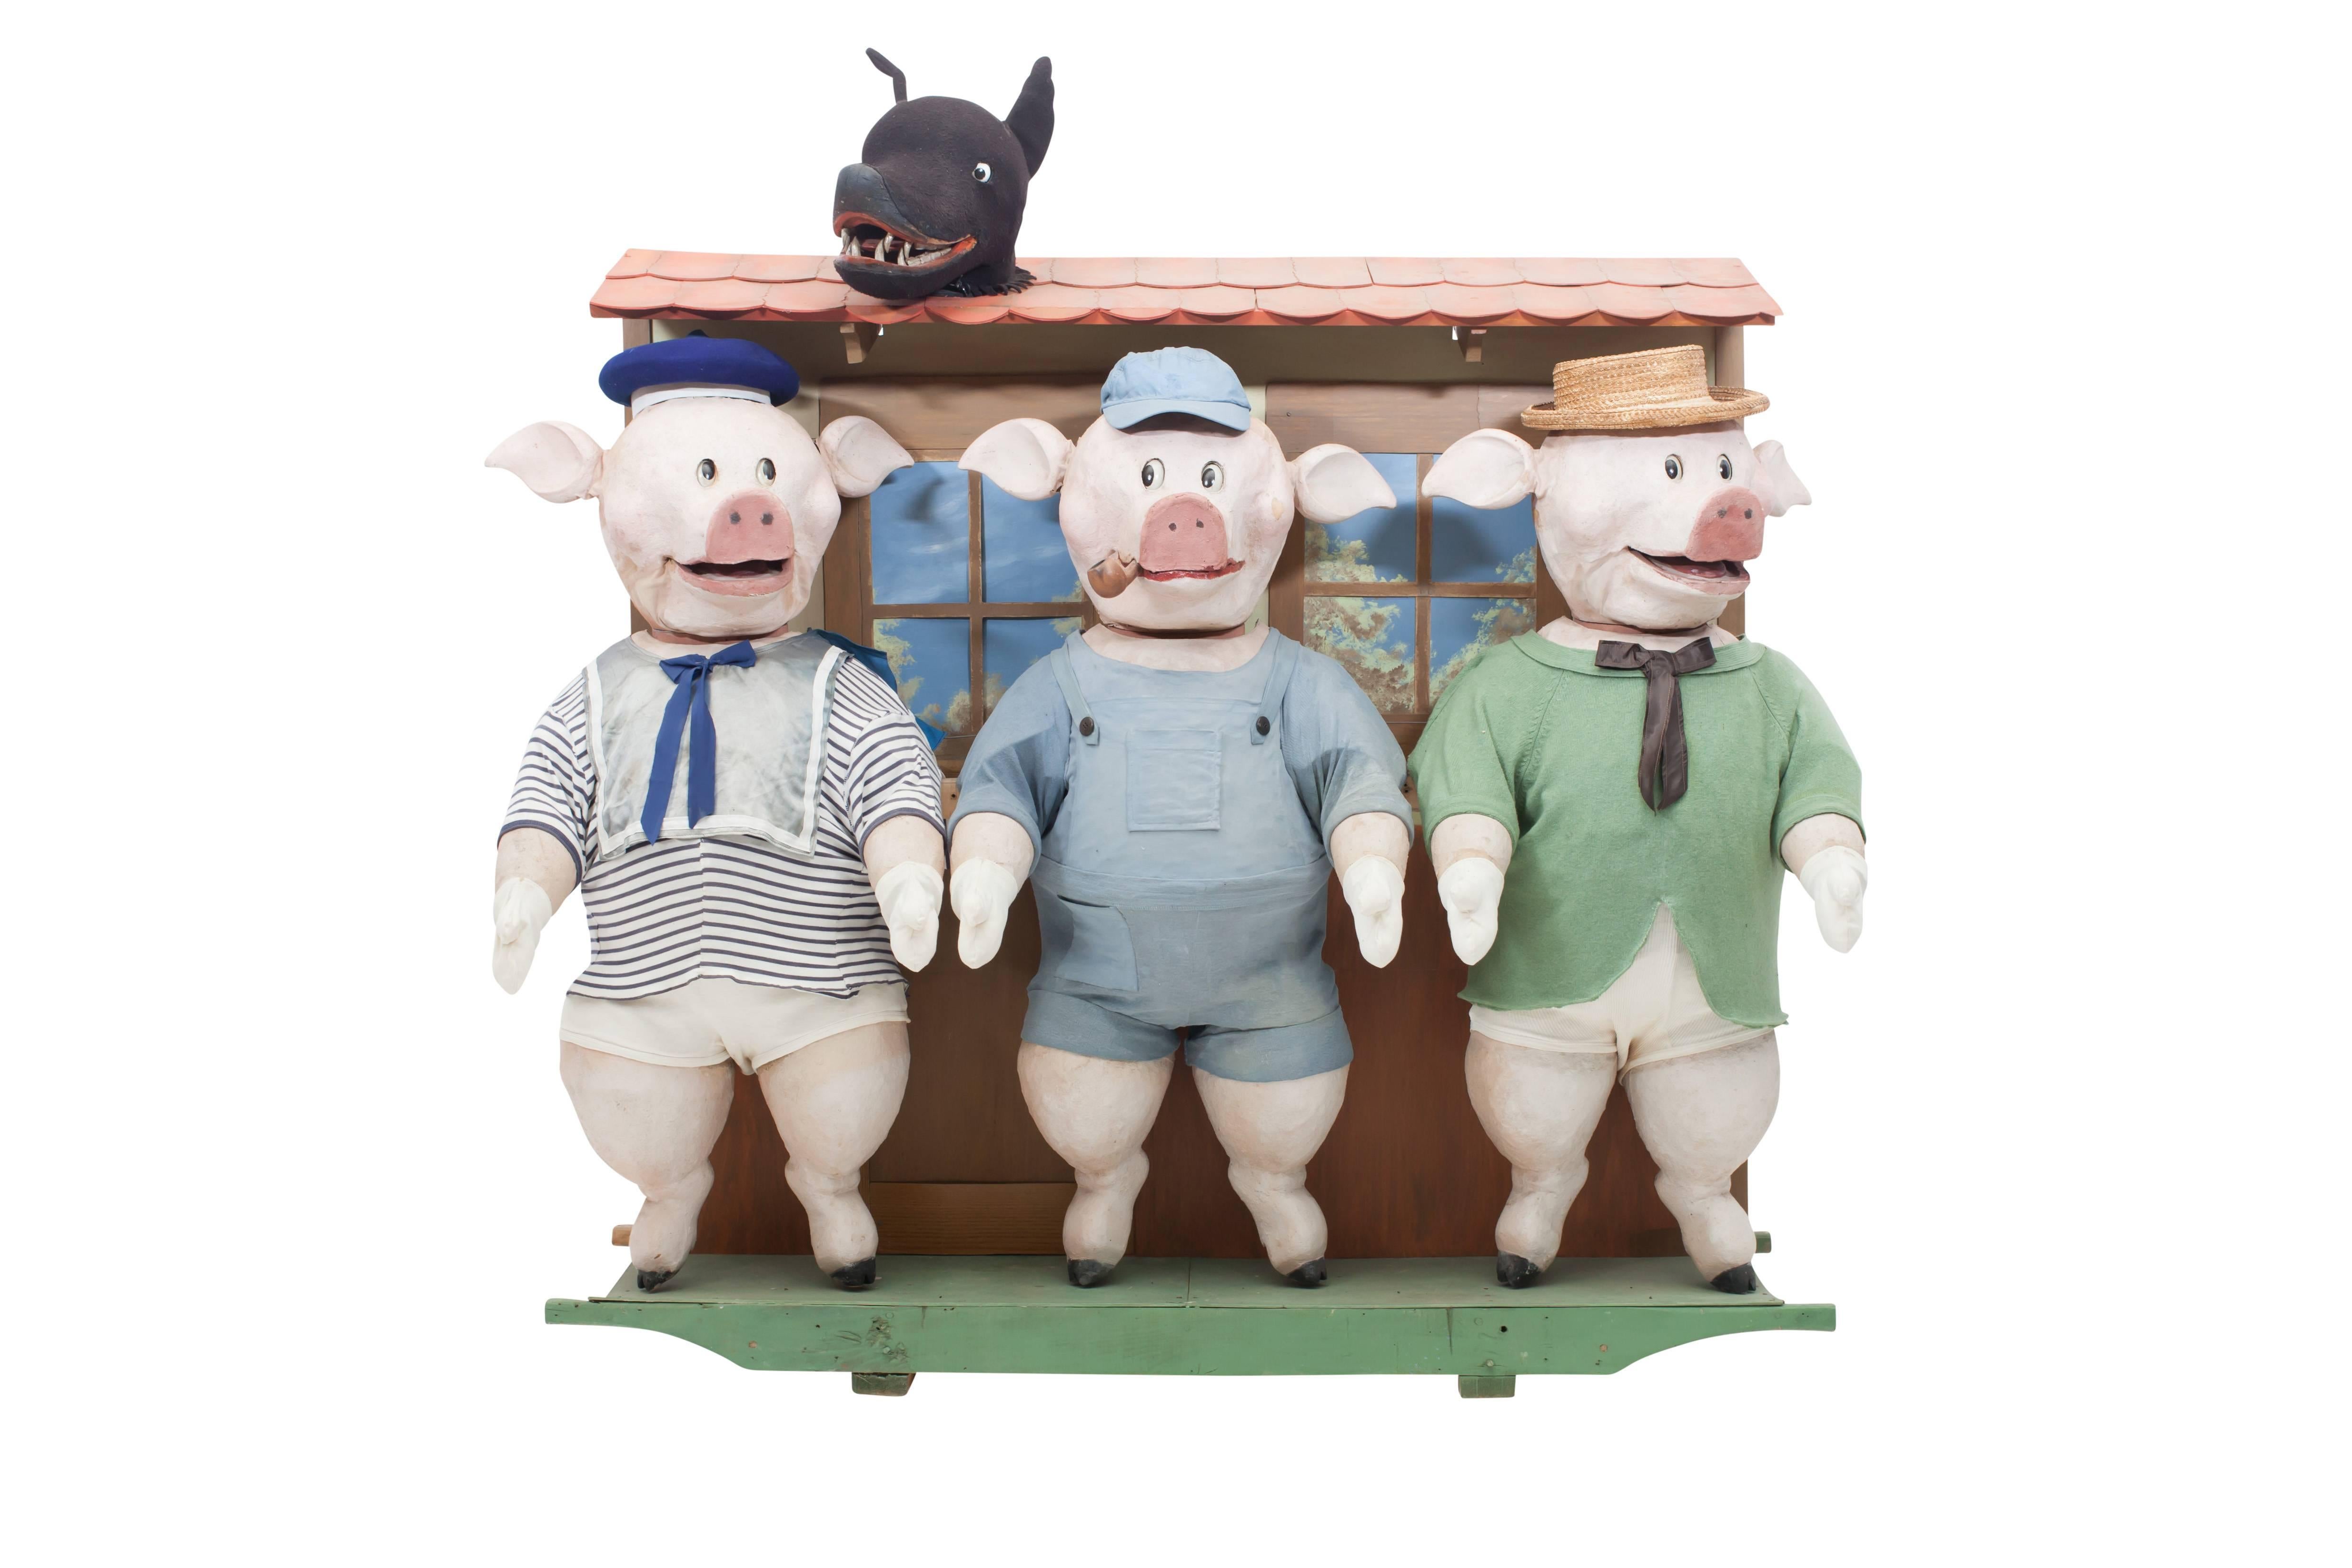 The three little pigs and the big bad wolf's movable puppetry piece.

A most rare item, depicting the famous fable by Joseph Jacobs.
A true story teller with a back system designed to control the pigs and wolf separately.

Italy, 1930s.

Measures: H